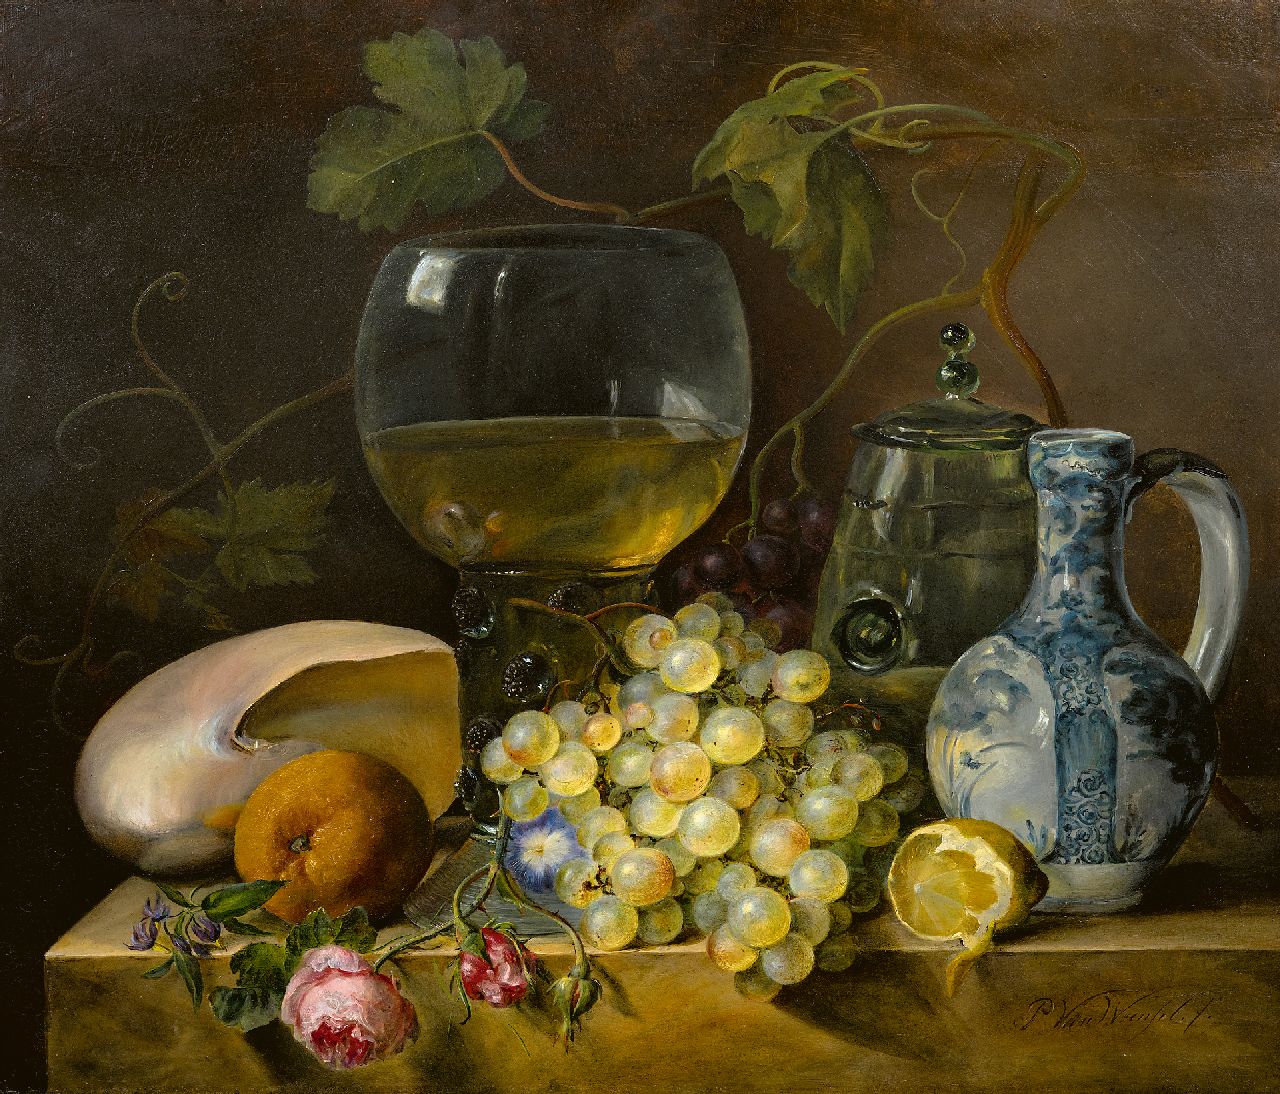 Petronella van Woensel | A still life of a rummer, exotic shell and grapes, oil on panel, 50.8 x 58.9 cm, signed l.r.